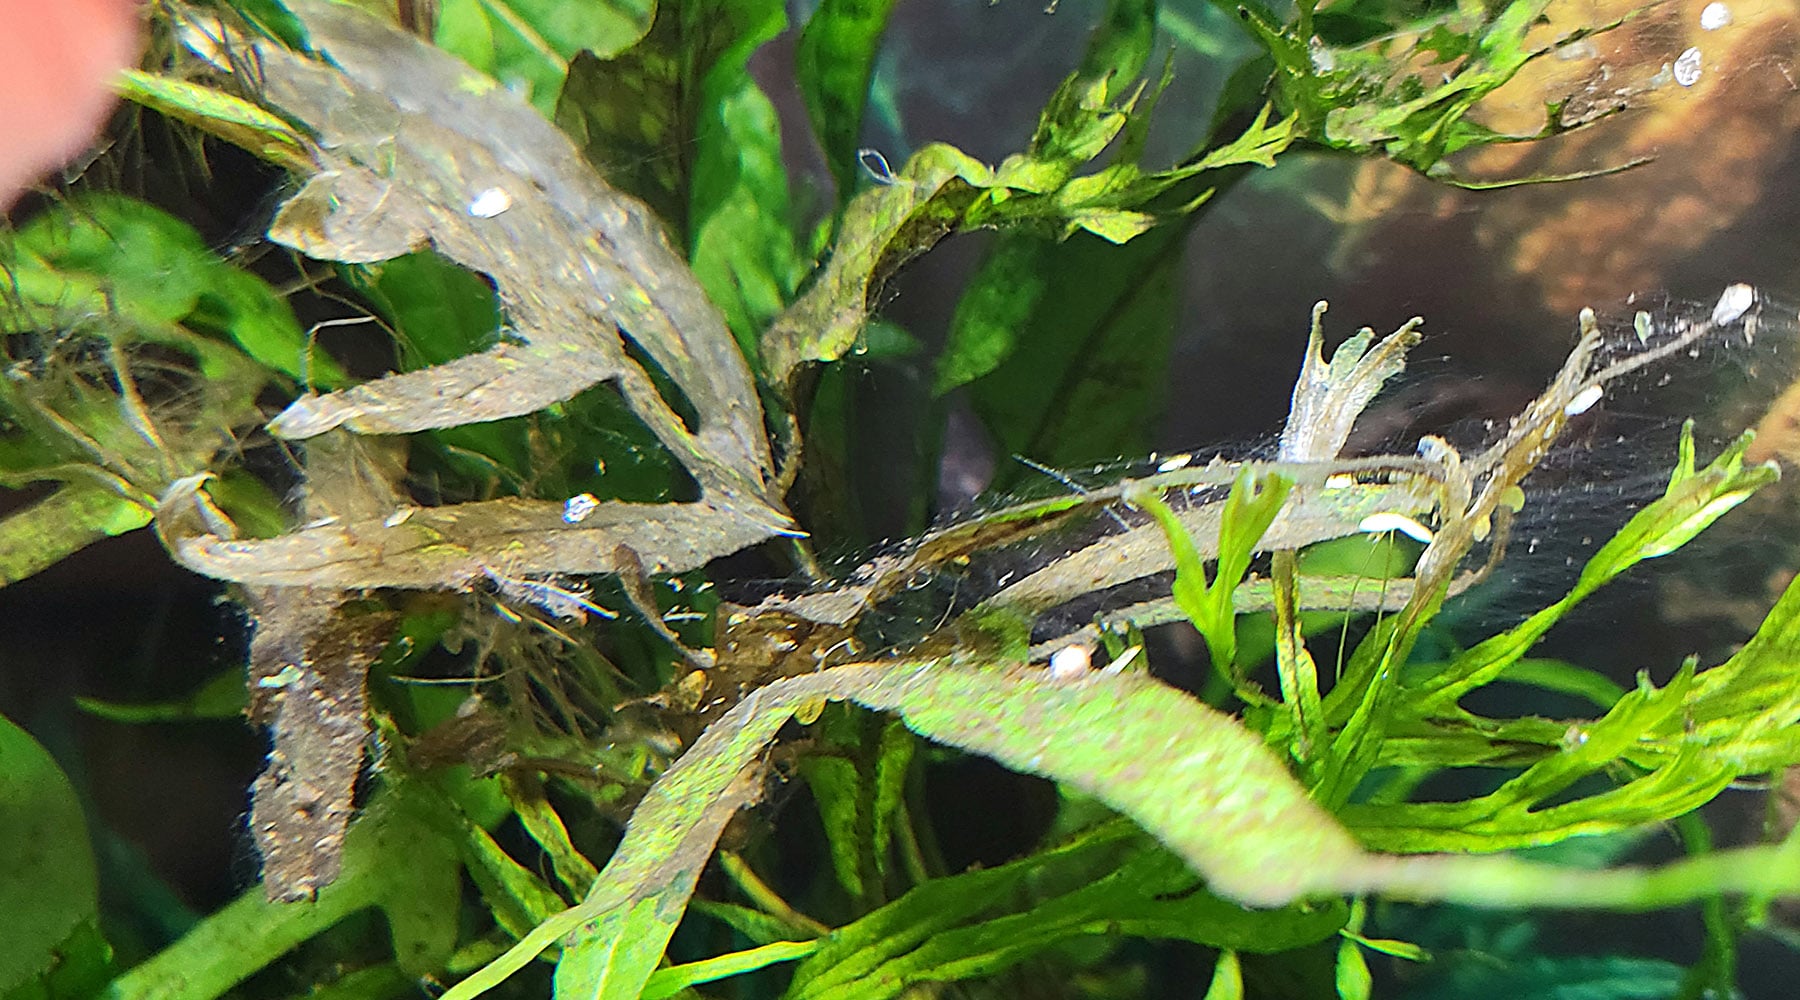 Why this? Tips on keeping Java Fern and Anubias